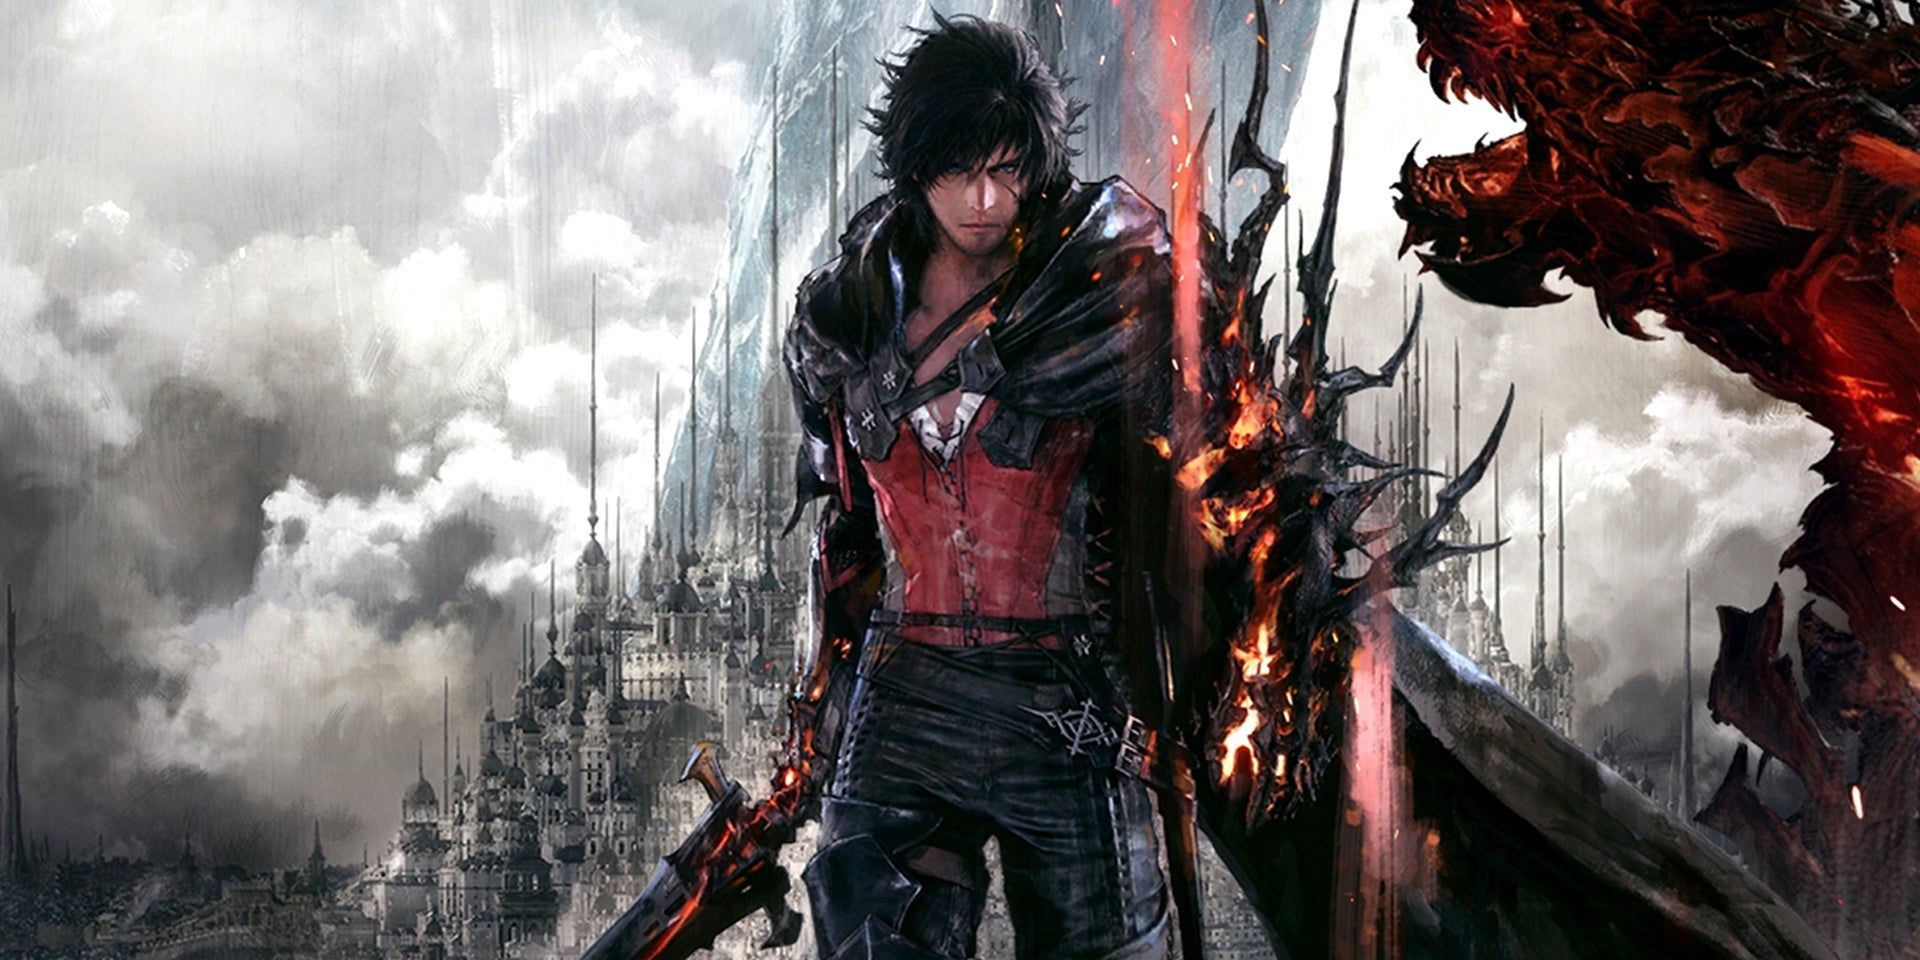 Final Fantasy 16 promo art showing Clive wielding a sword with a kingdom of Valisthea in the background.